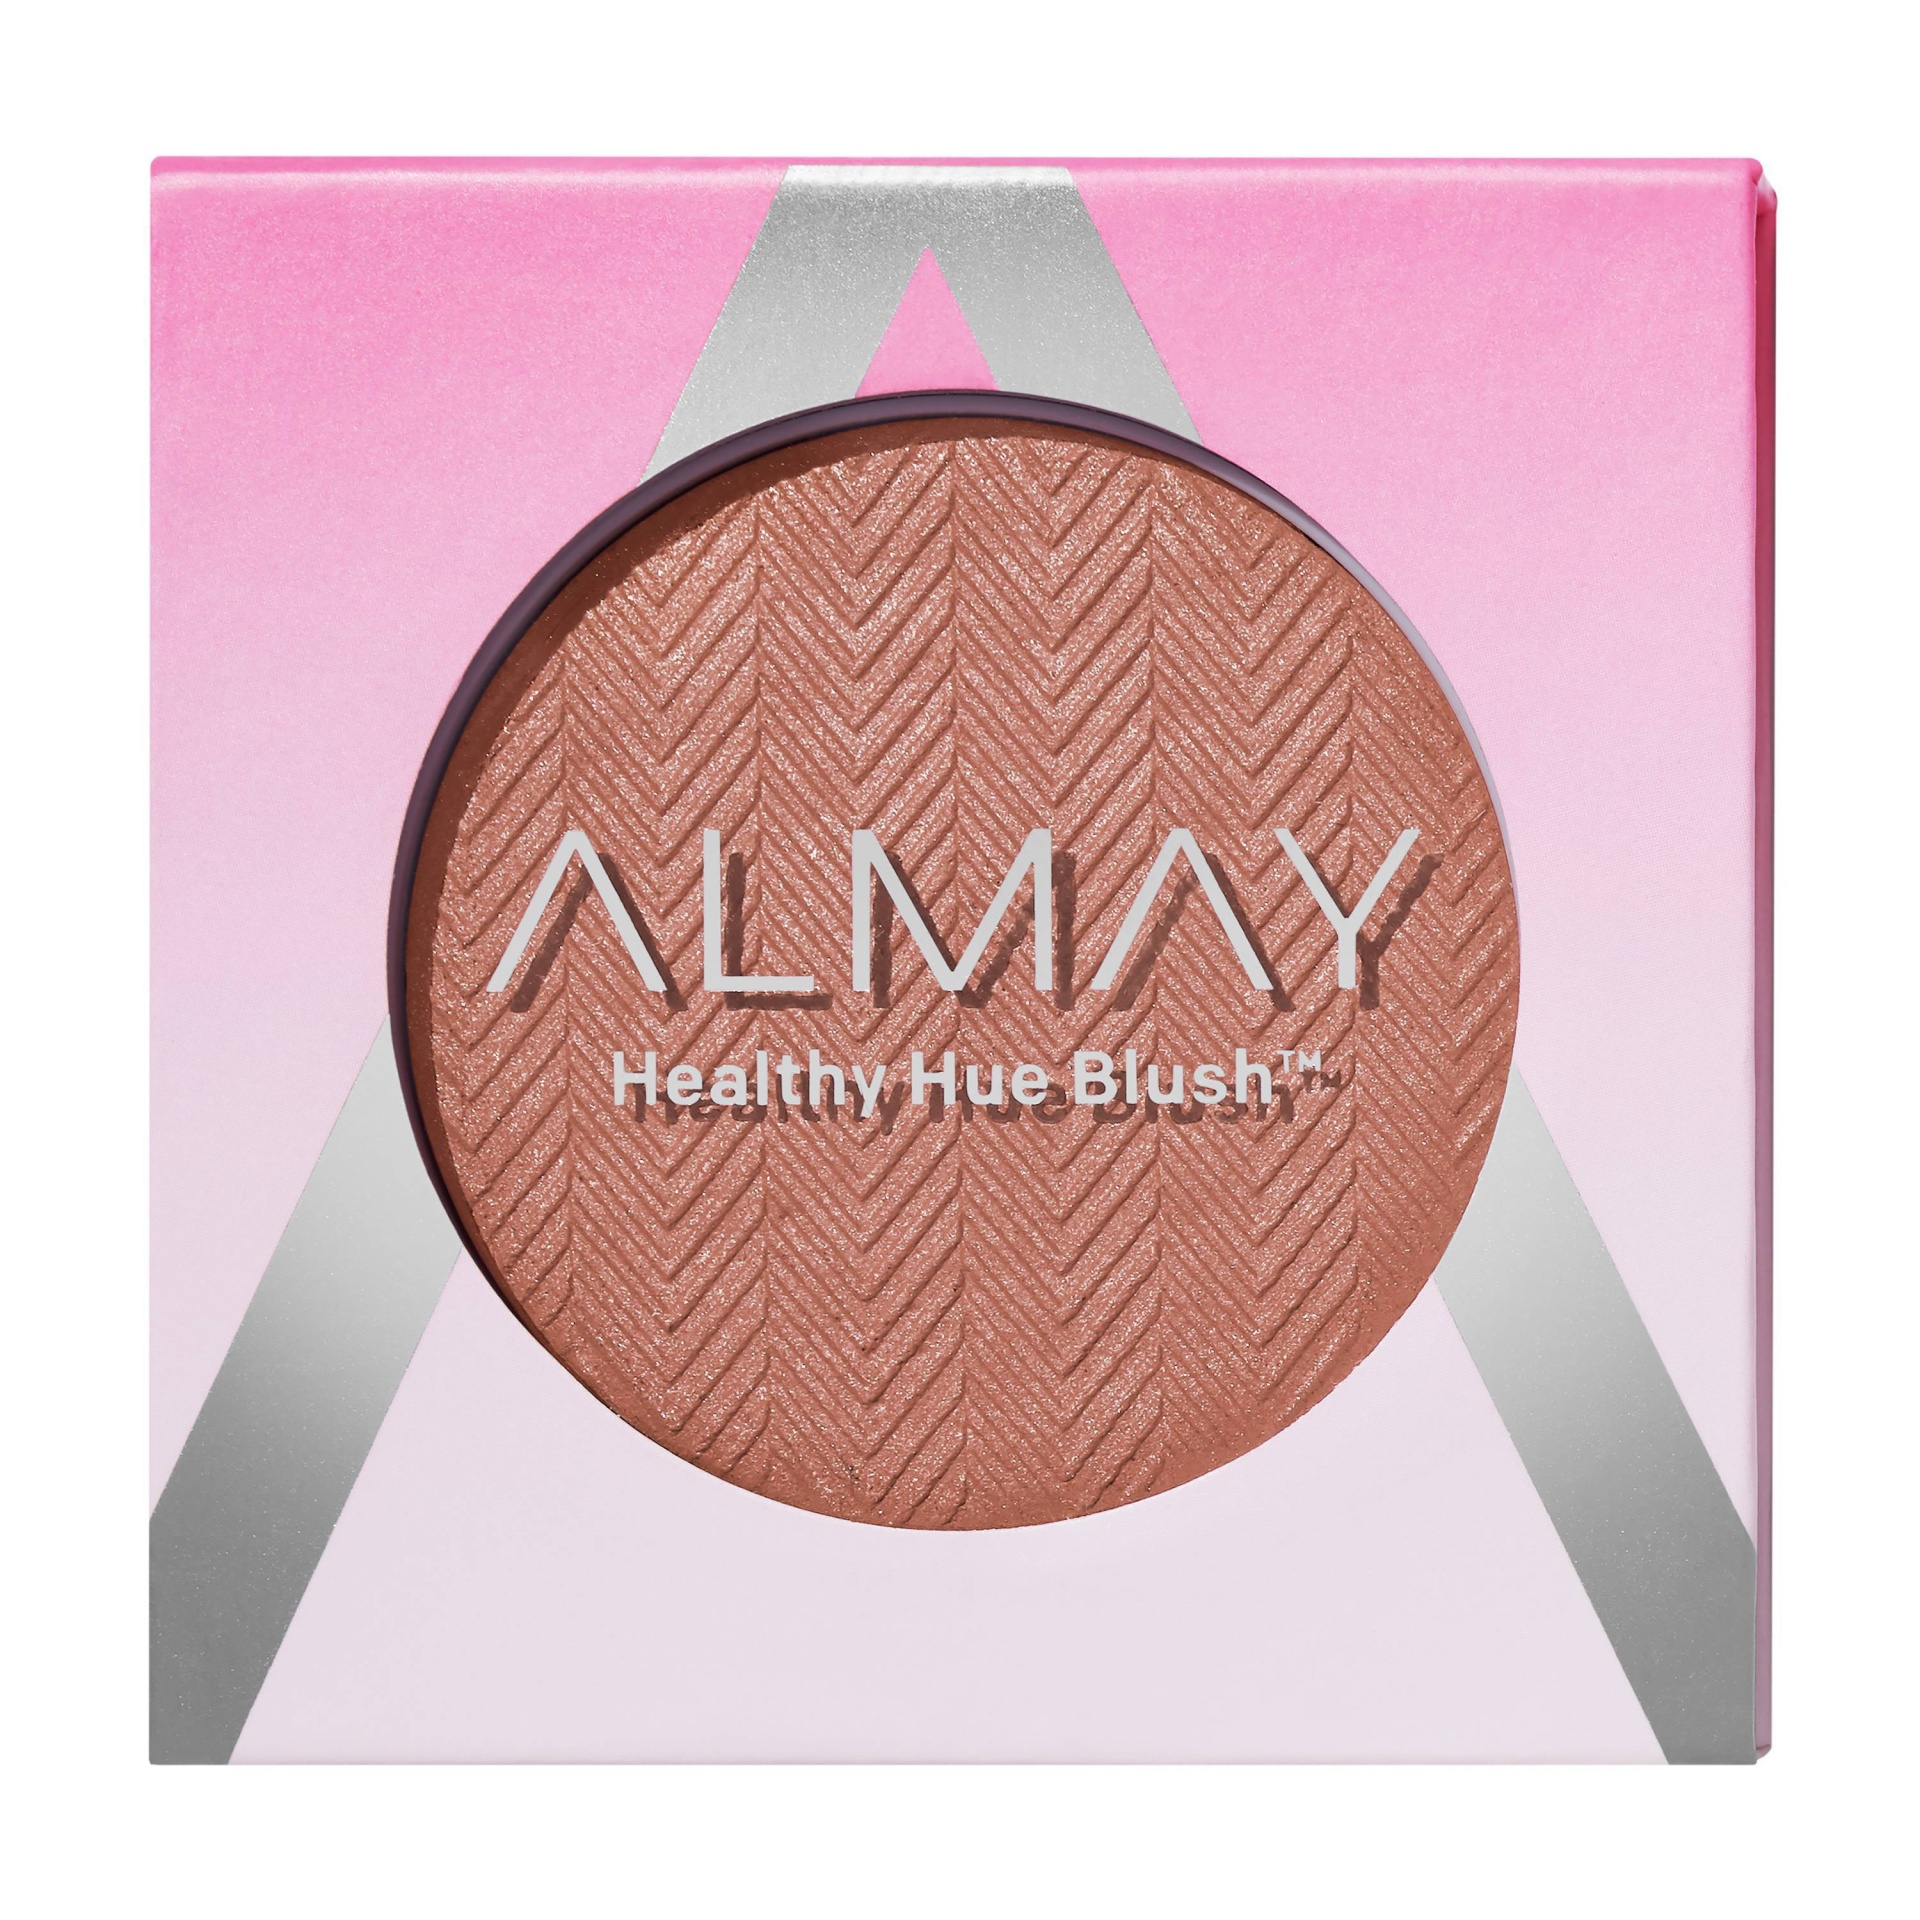 slide 1 of 5, Almay Healthy Hue Blush, Nearly Nude, 0.17 oz